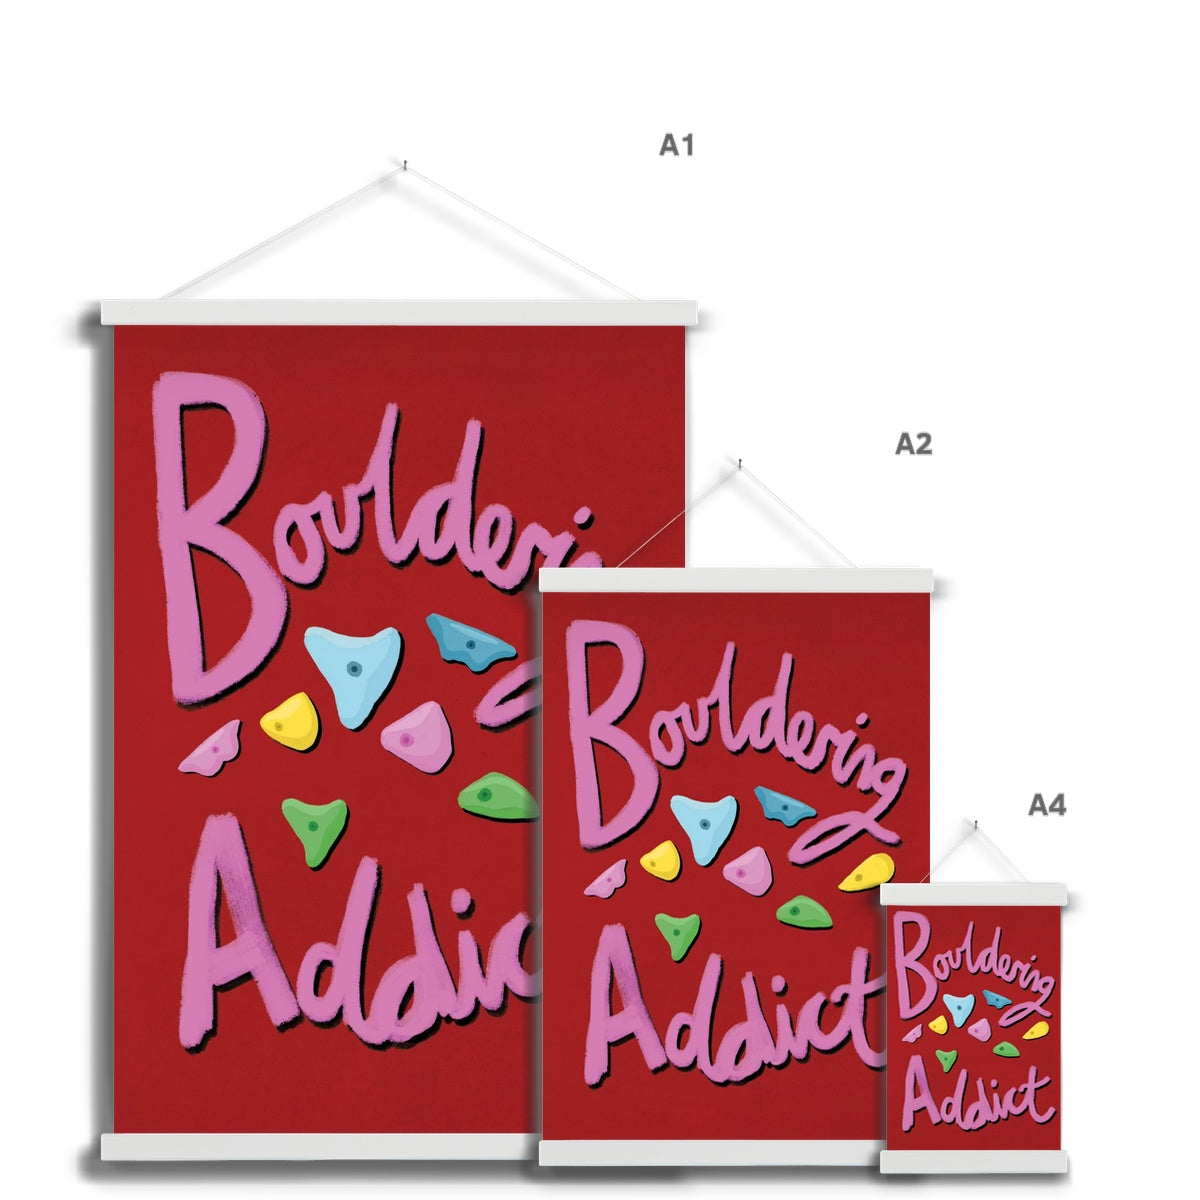 Bouldering Addict - Red and Pink Fine Art Print with Hanger